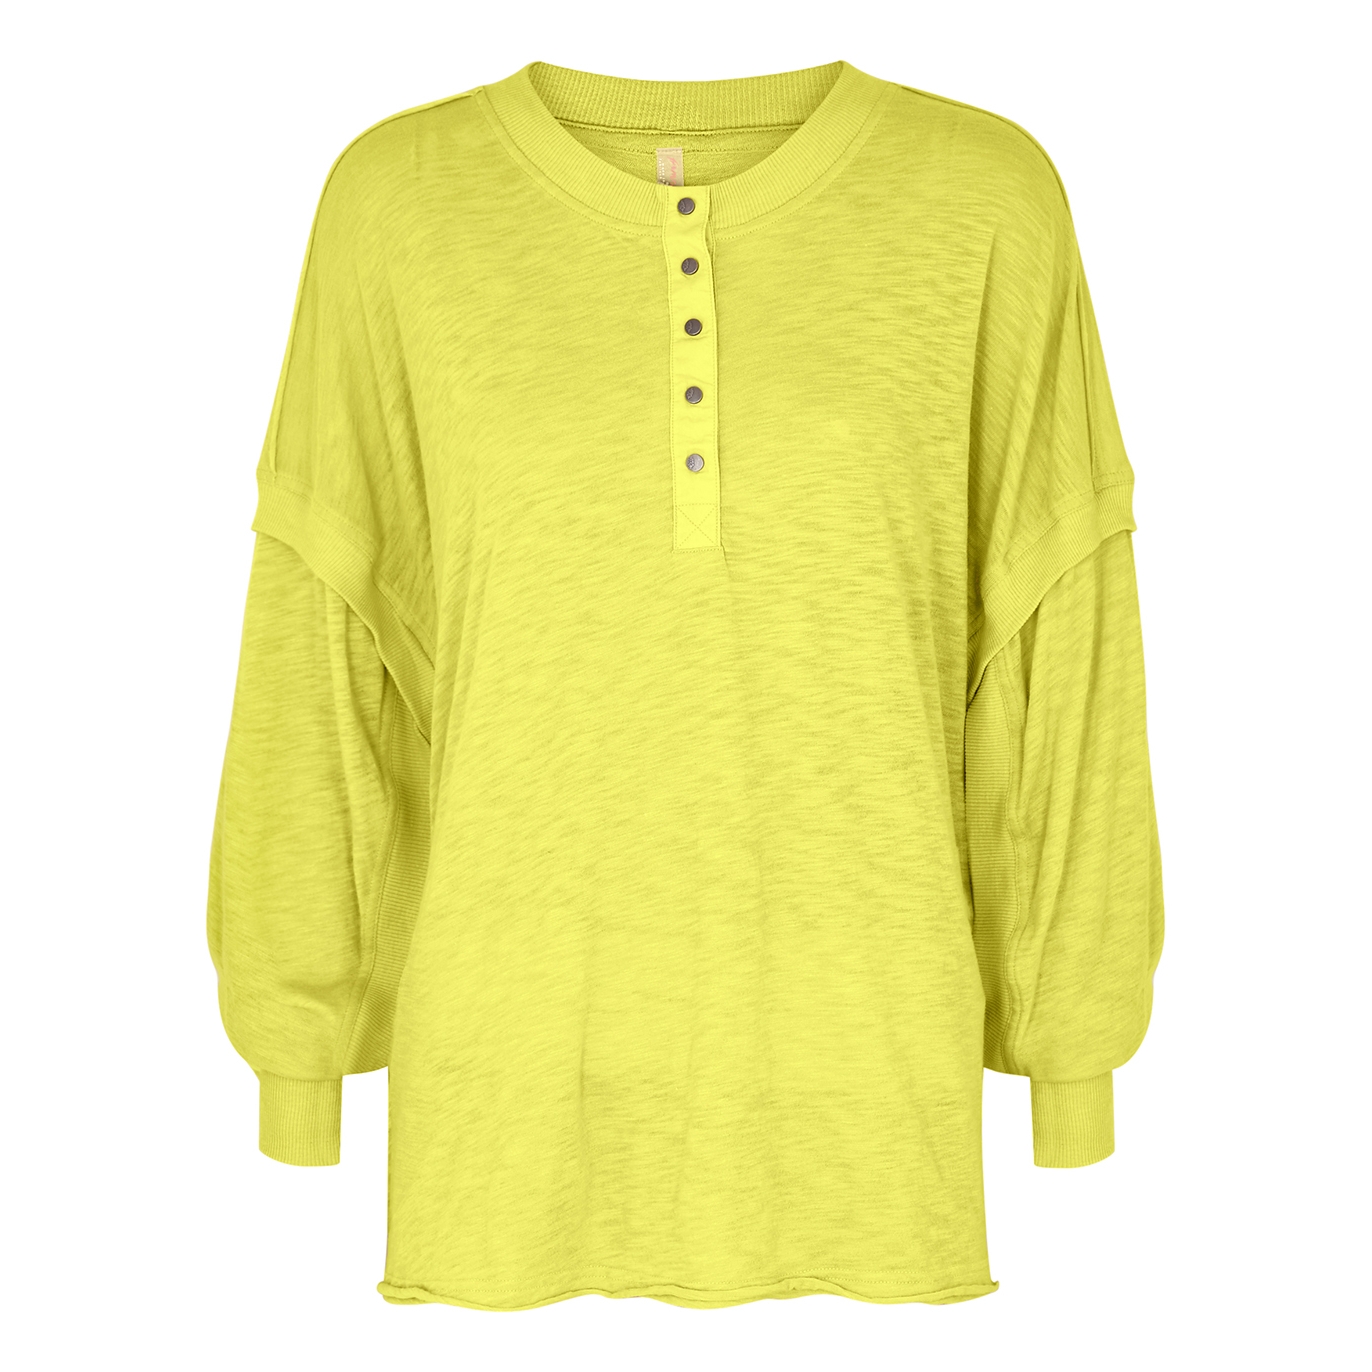 Free People Movement One Up Chartreuse Slubbed Cotton-blend Top - Yellow - M